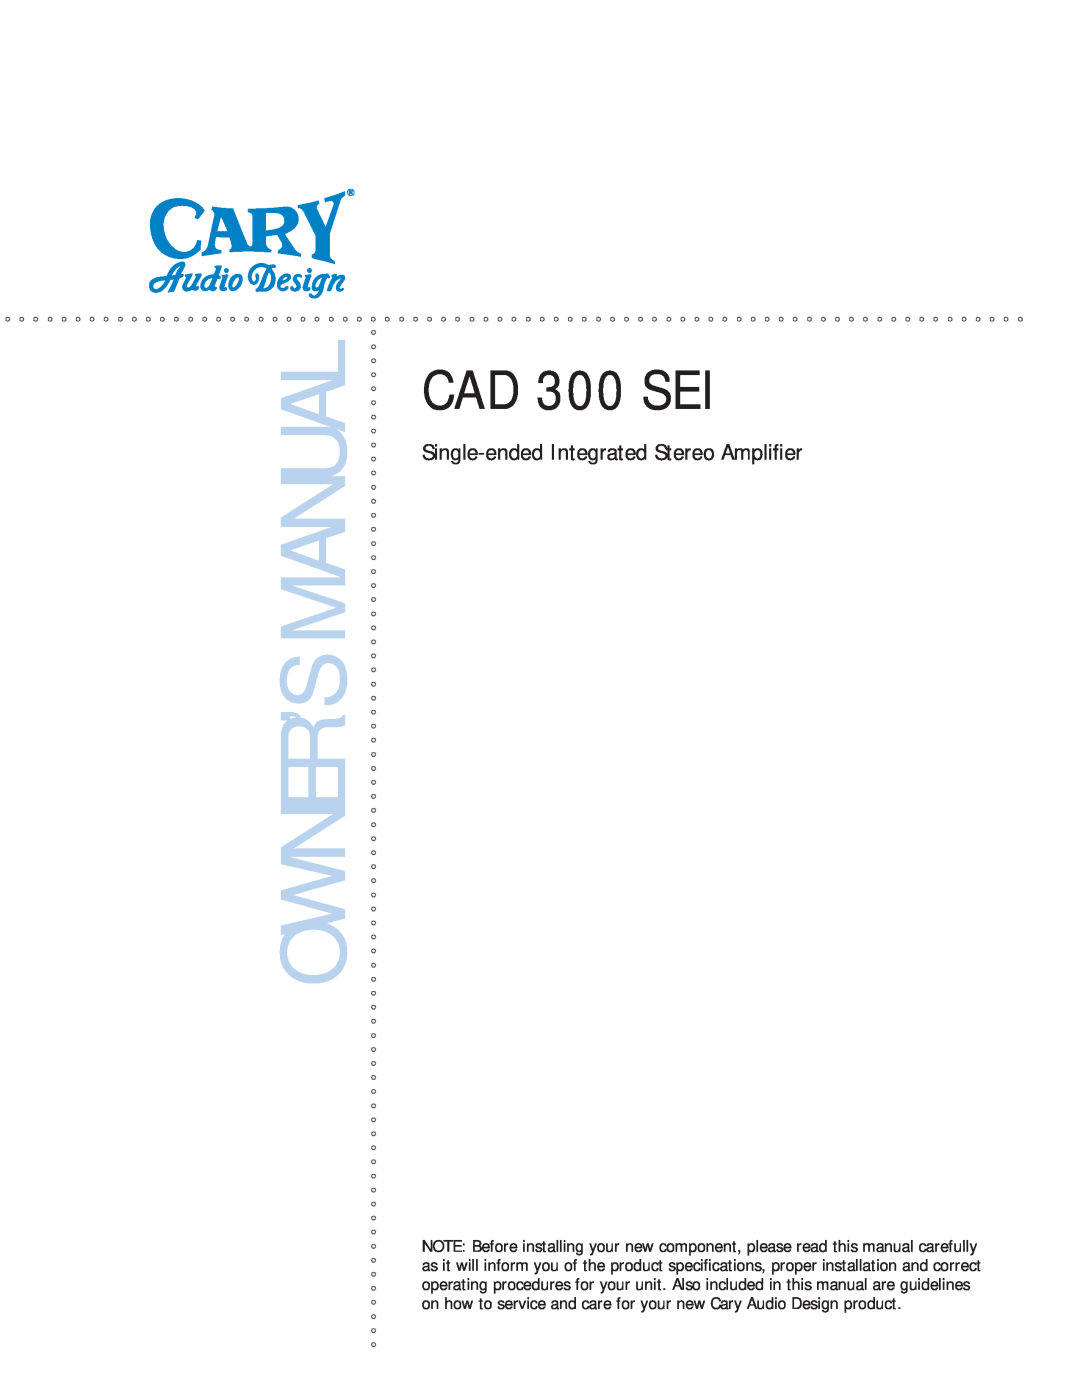 Cary Audio Design owner manual CAD 300 SEI, Single-endedIntegrated Stereo Ampliﬁer 